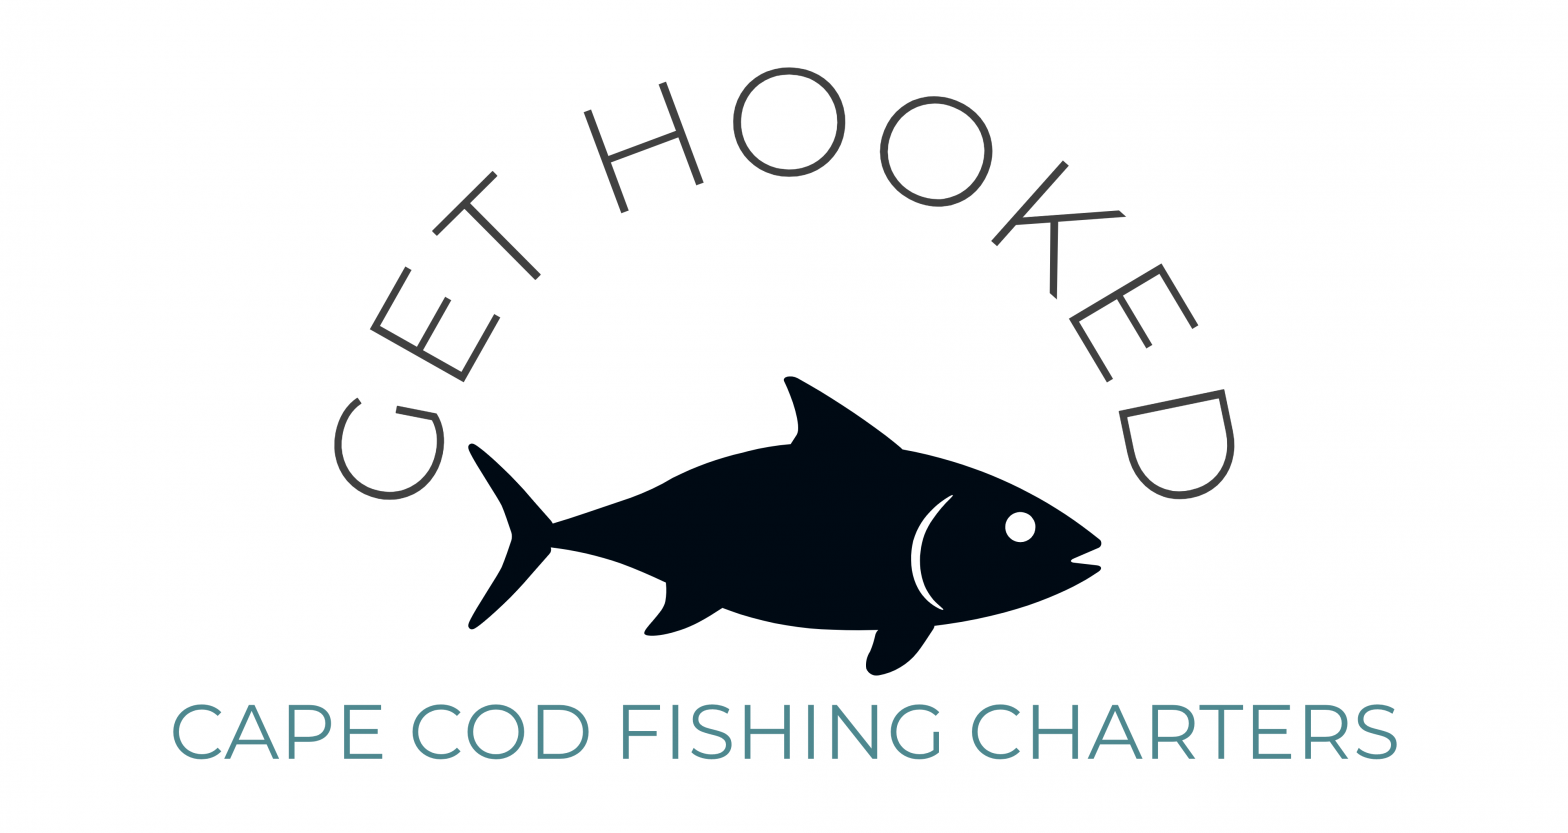 Hooked on Cape Cod